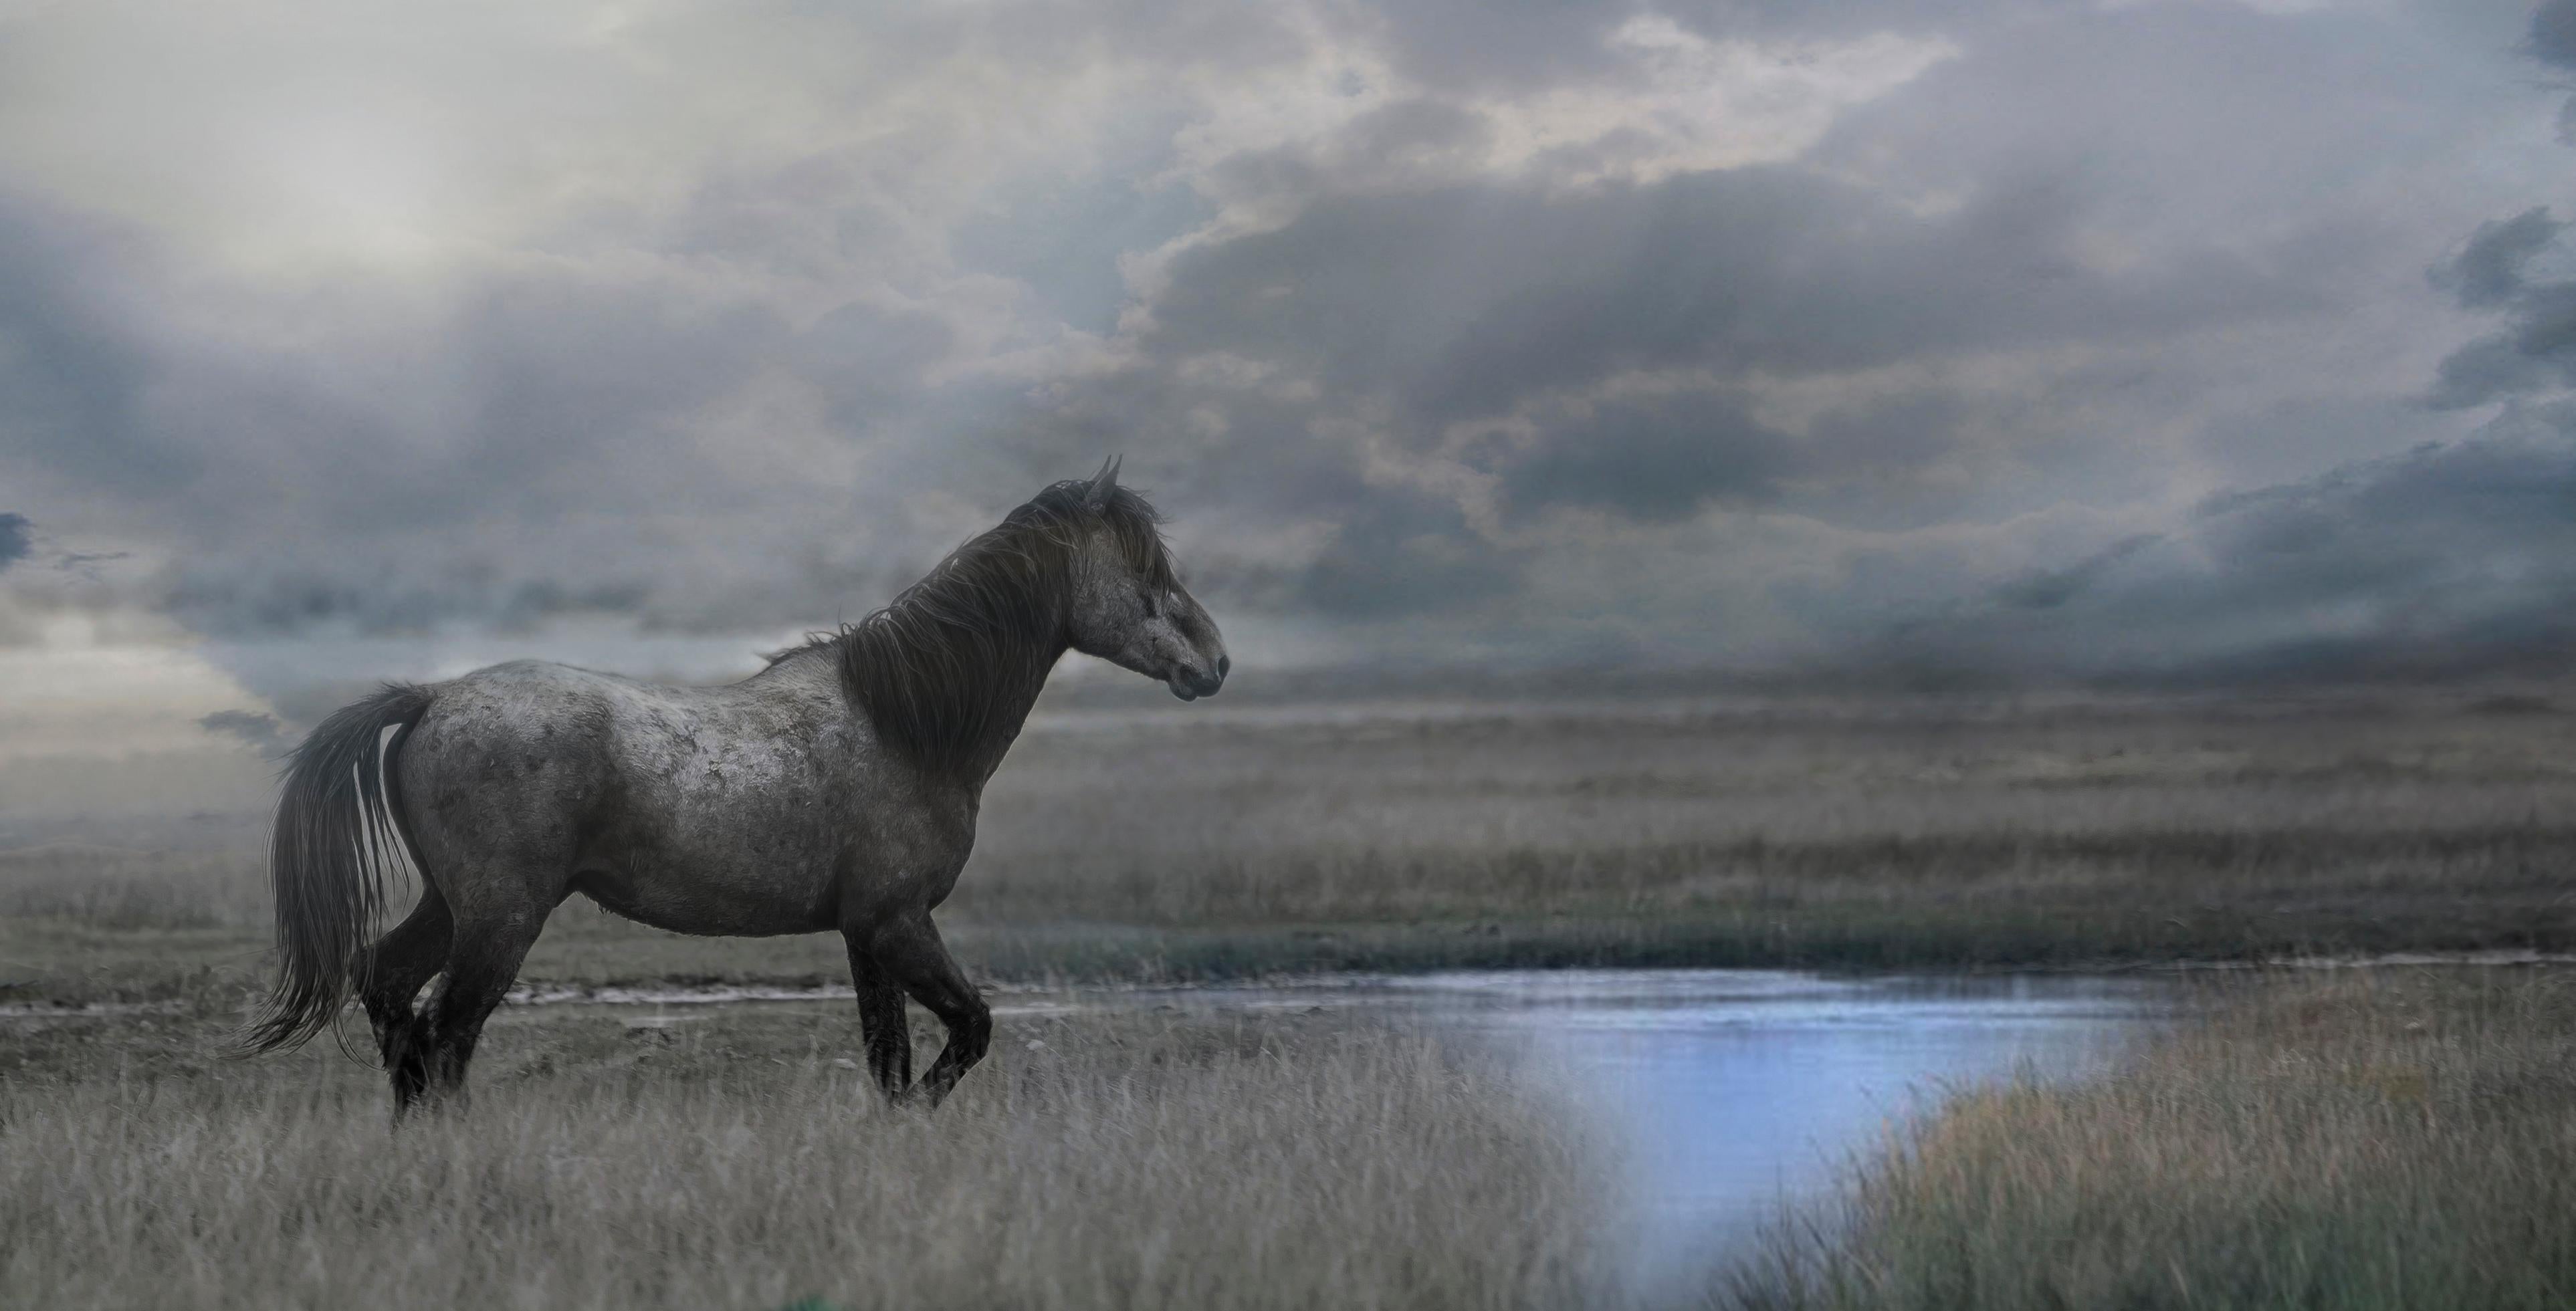 Shane Russeck Landscape Photograph - Once Upon a Time in the West - 60 x 30  Contemporary  Photography of Wild Horses